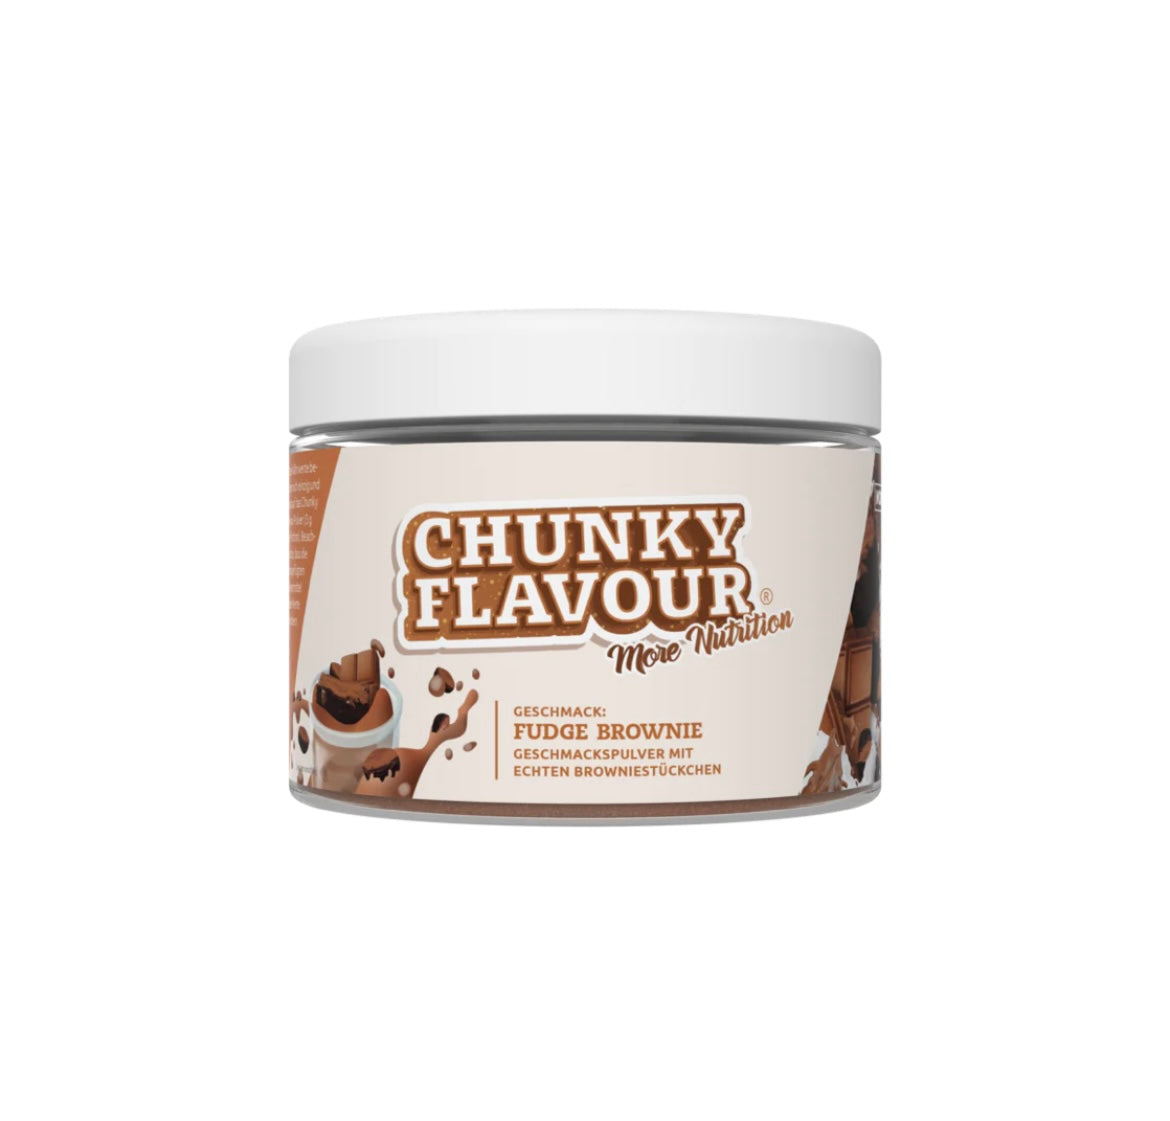 CHUNKY FLAVOUR - MORE NUTRITION, 250G